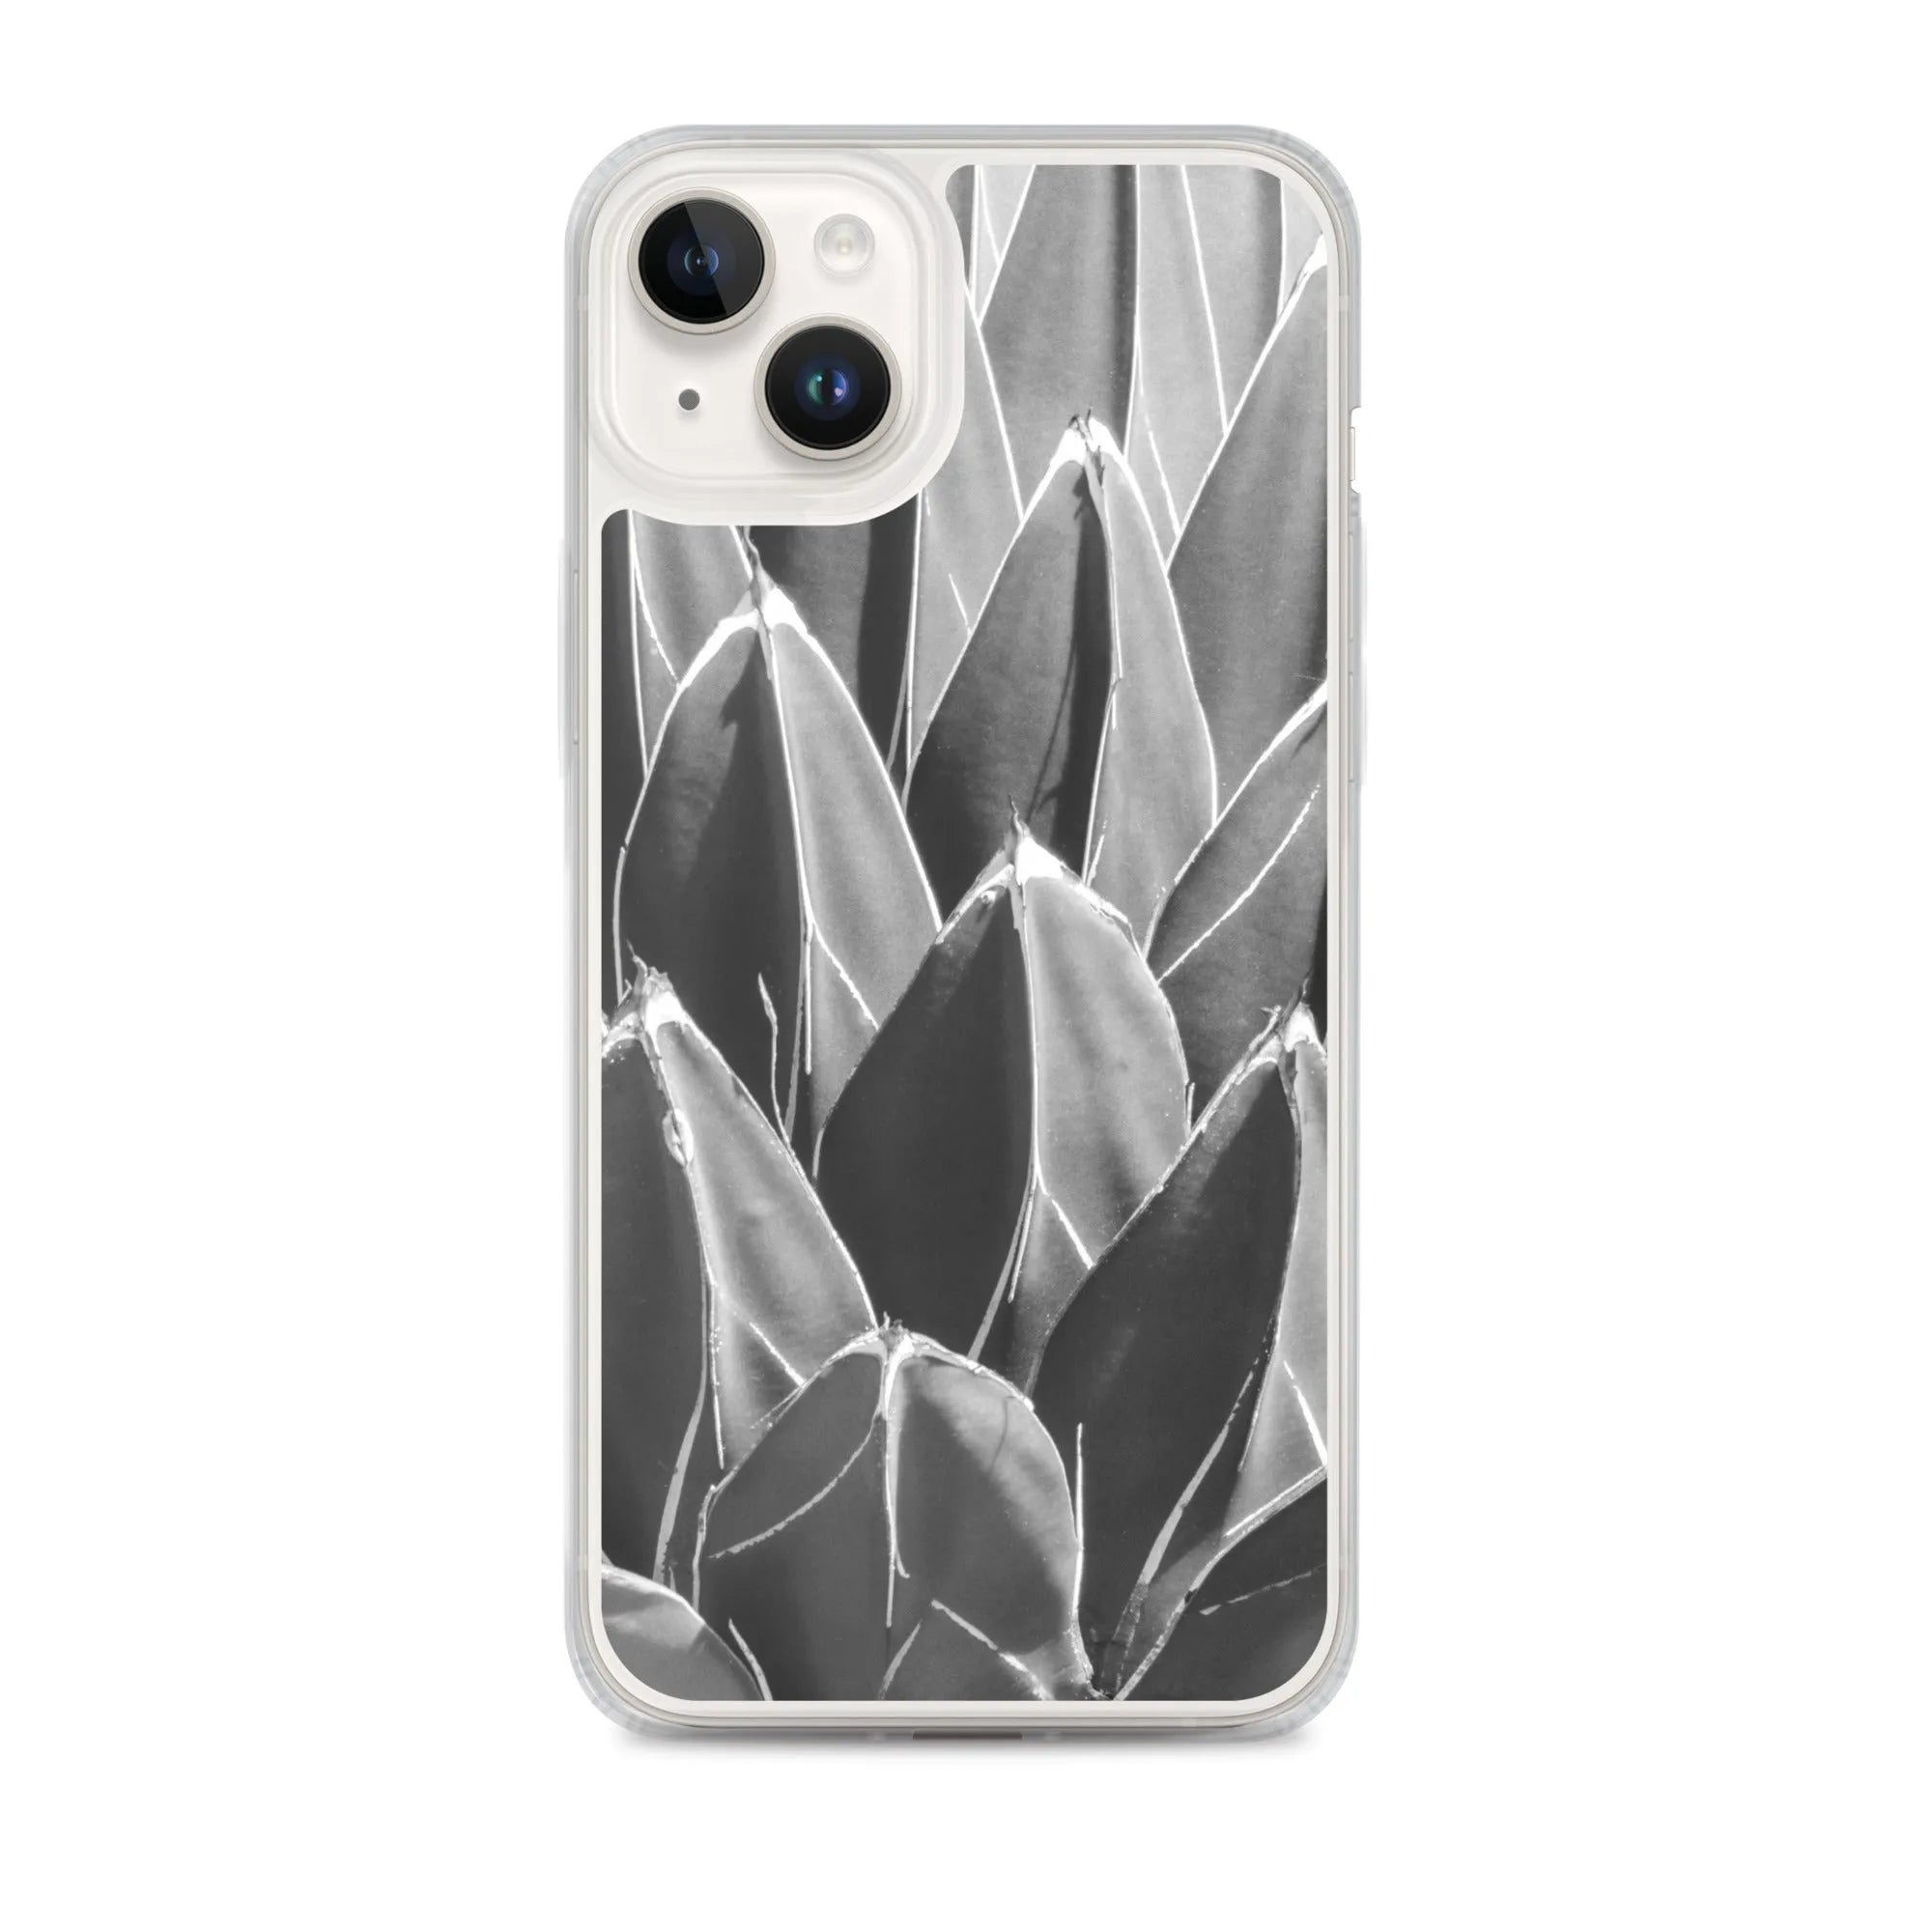 Decked Out Botanical Art Iphone Case - black And White - Iphone 14 Plus - Mobile Phone Cases - Aesthetic Art